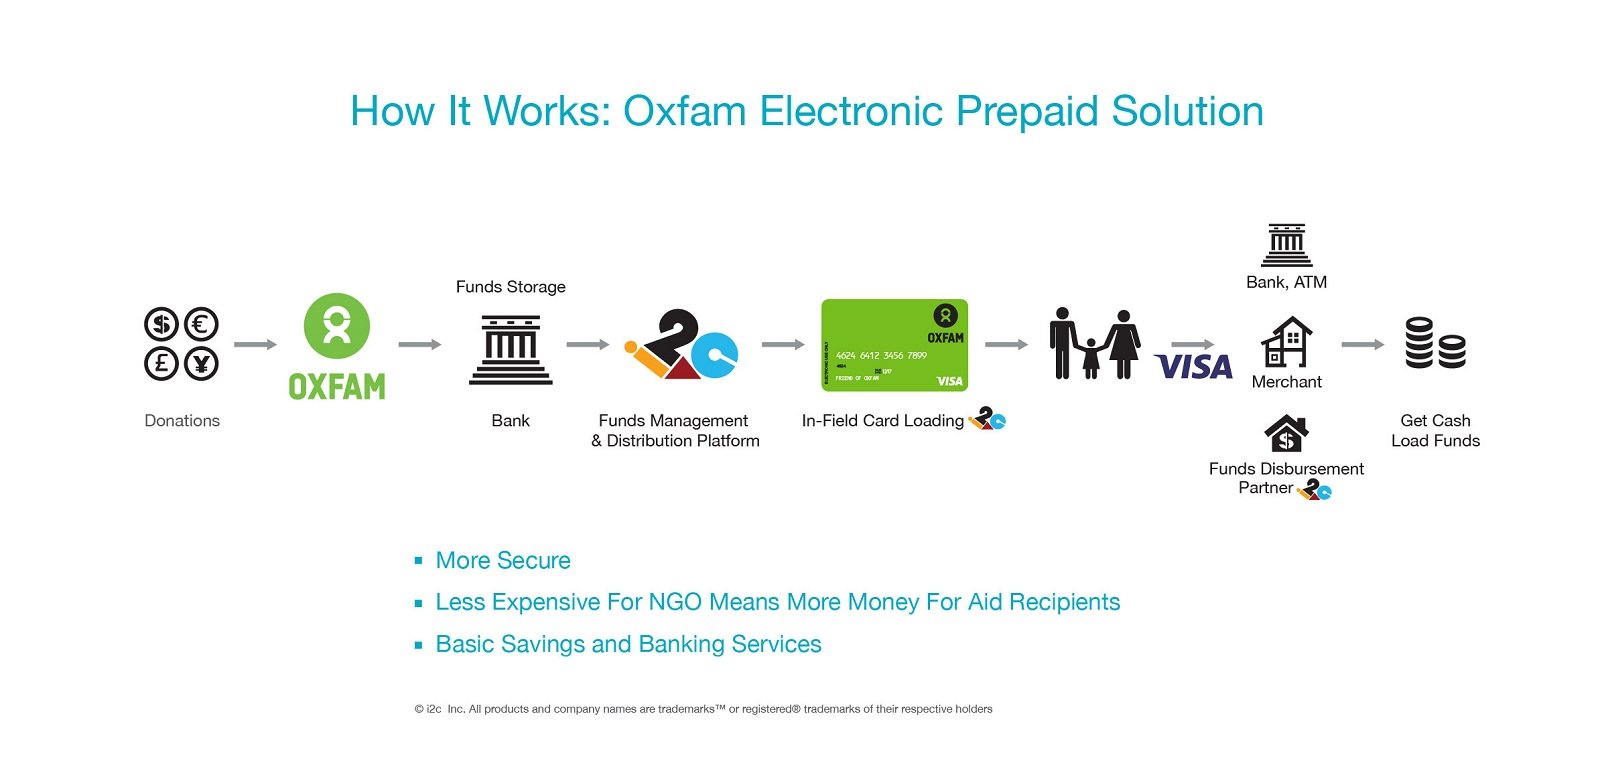 Oxfam Electronic Prepaid Solution